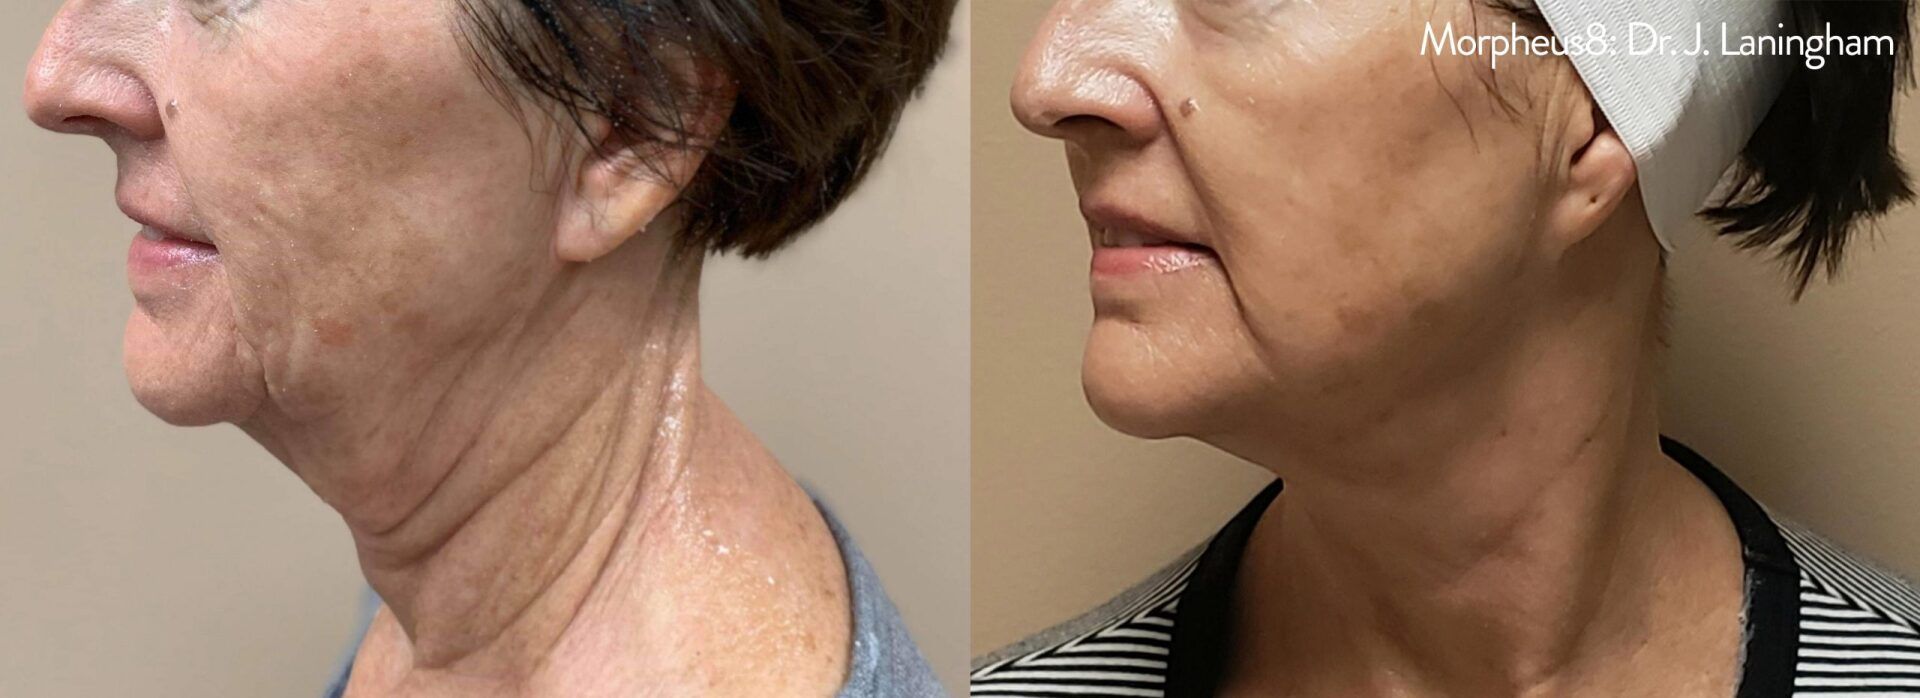 mature female patient before and after Morpheus8 face contouring treatment